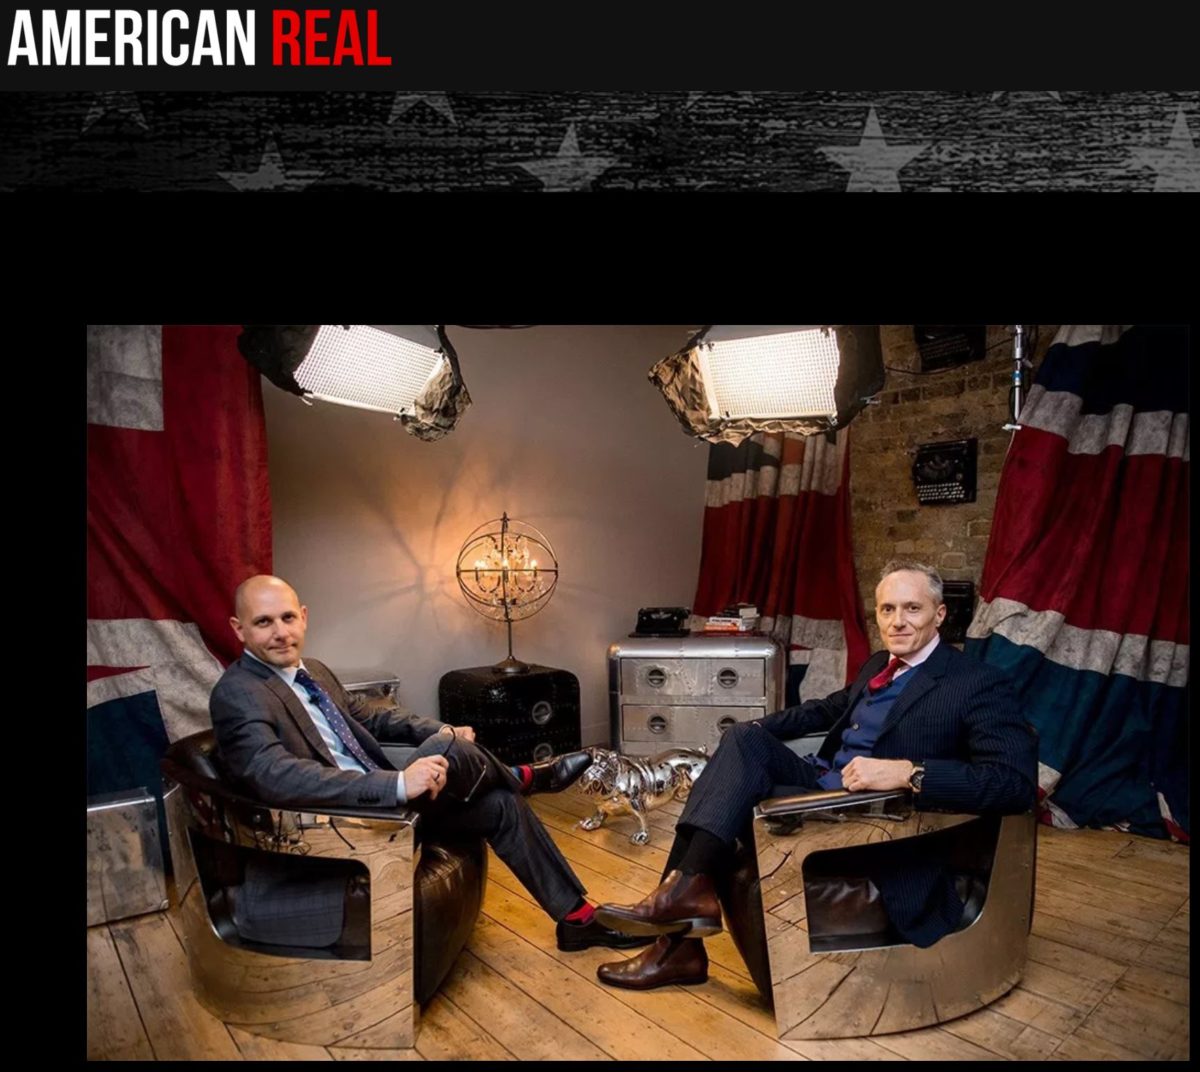 Roger Brooks/American Real — Interview